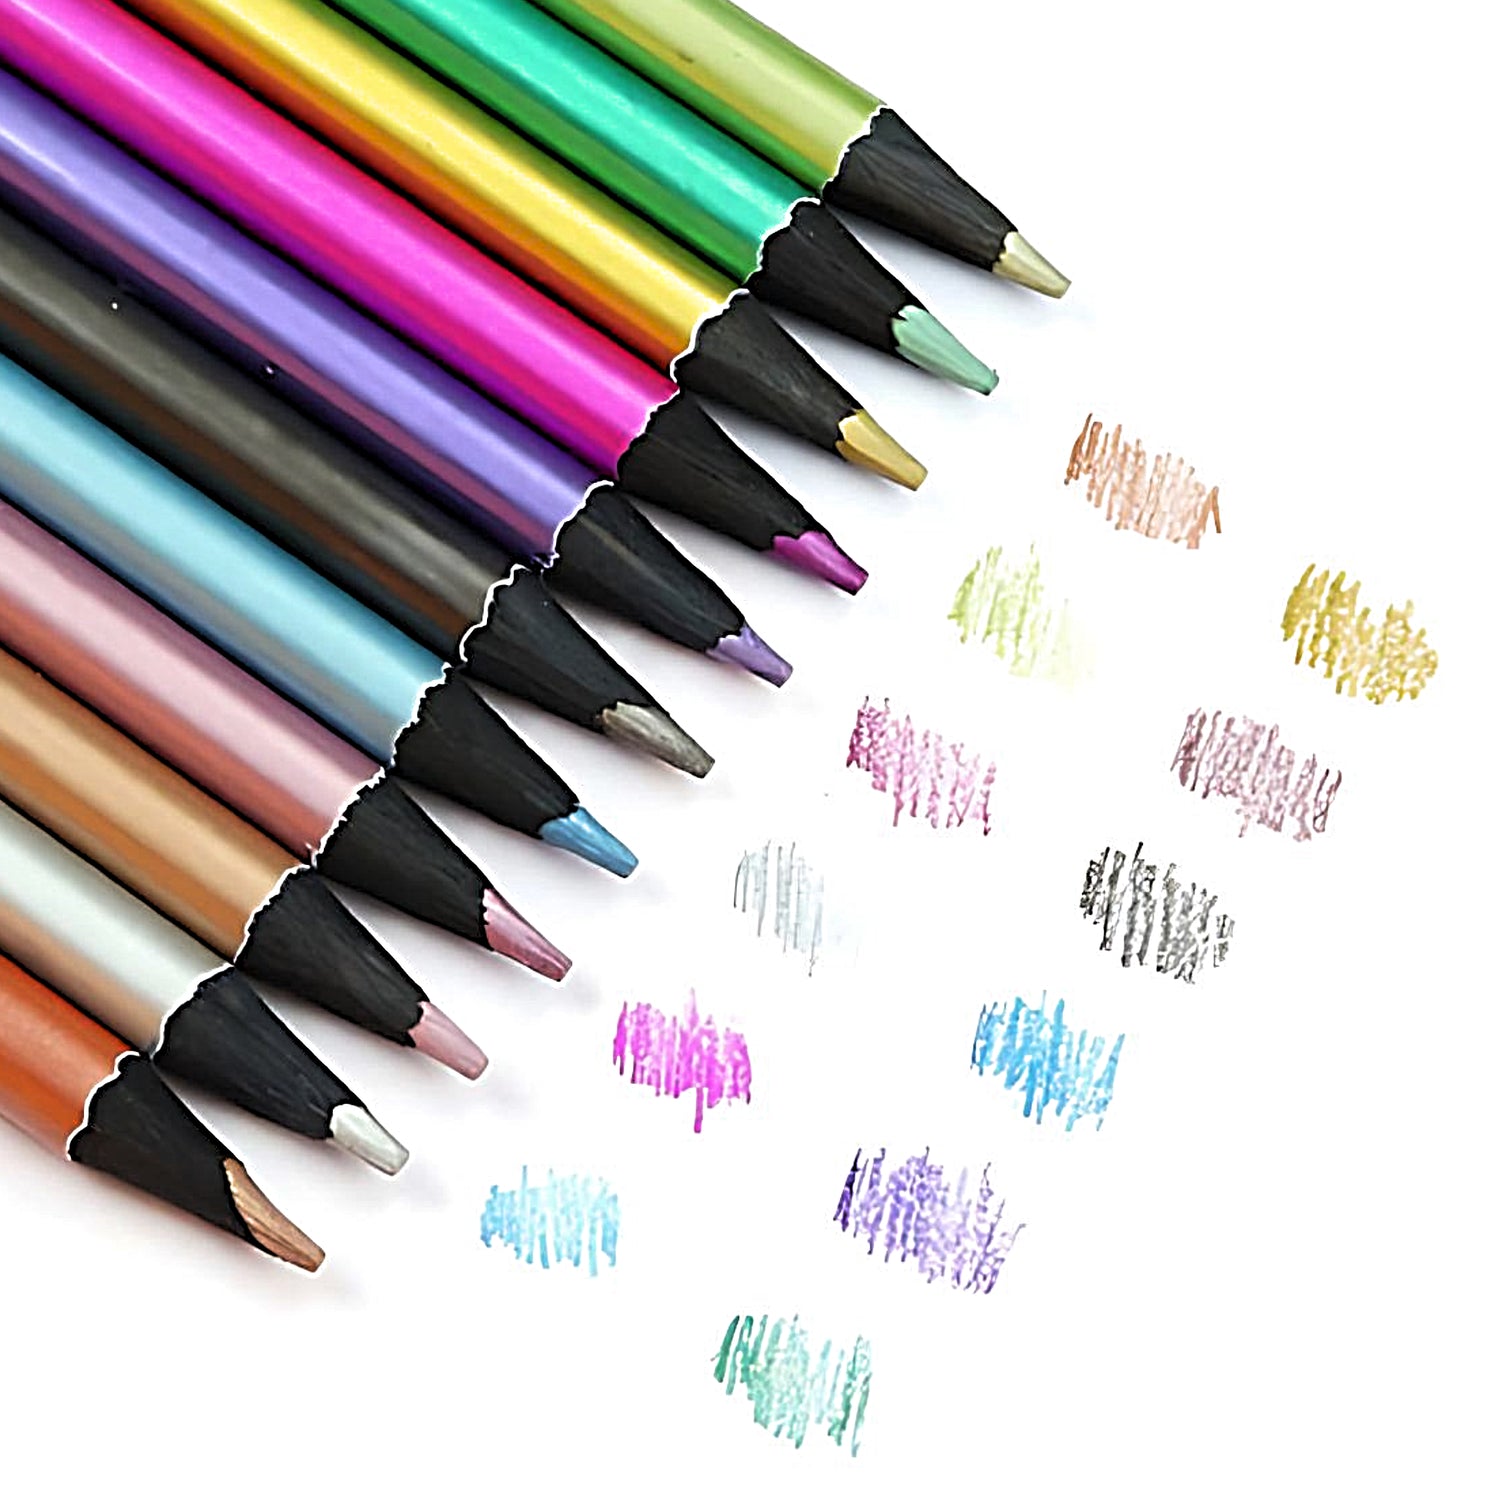 a close-up of metallic colored pencils with swatches